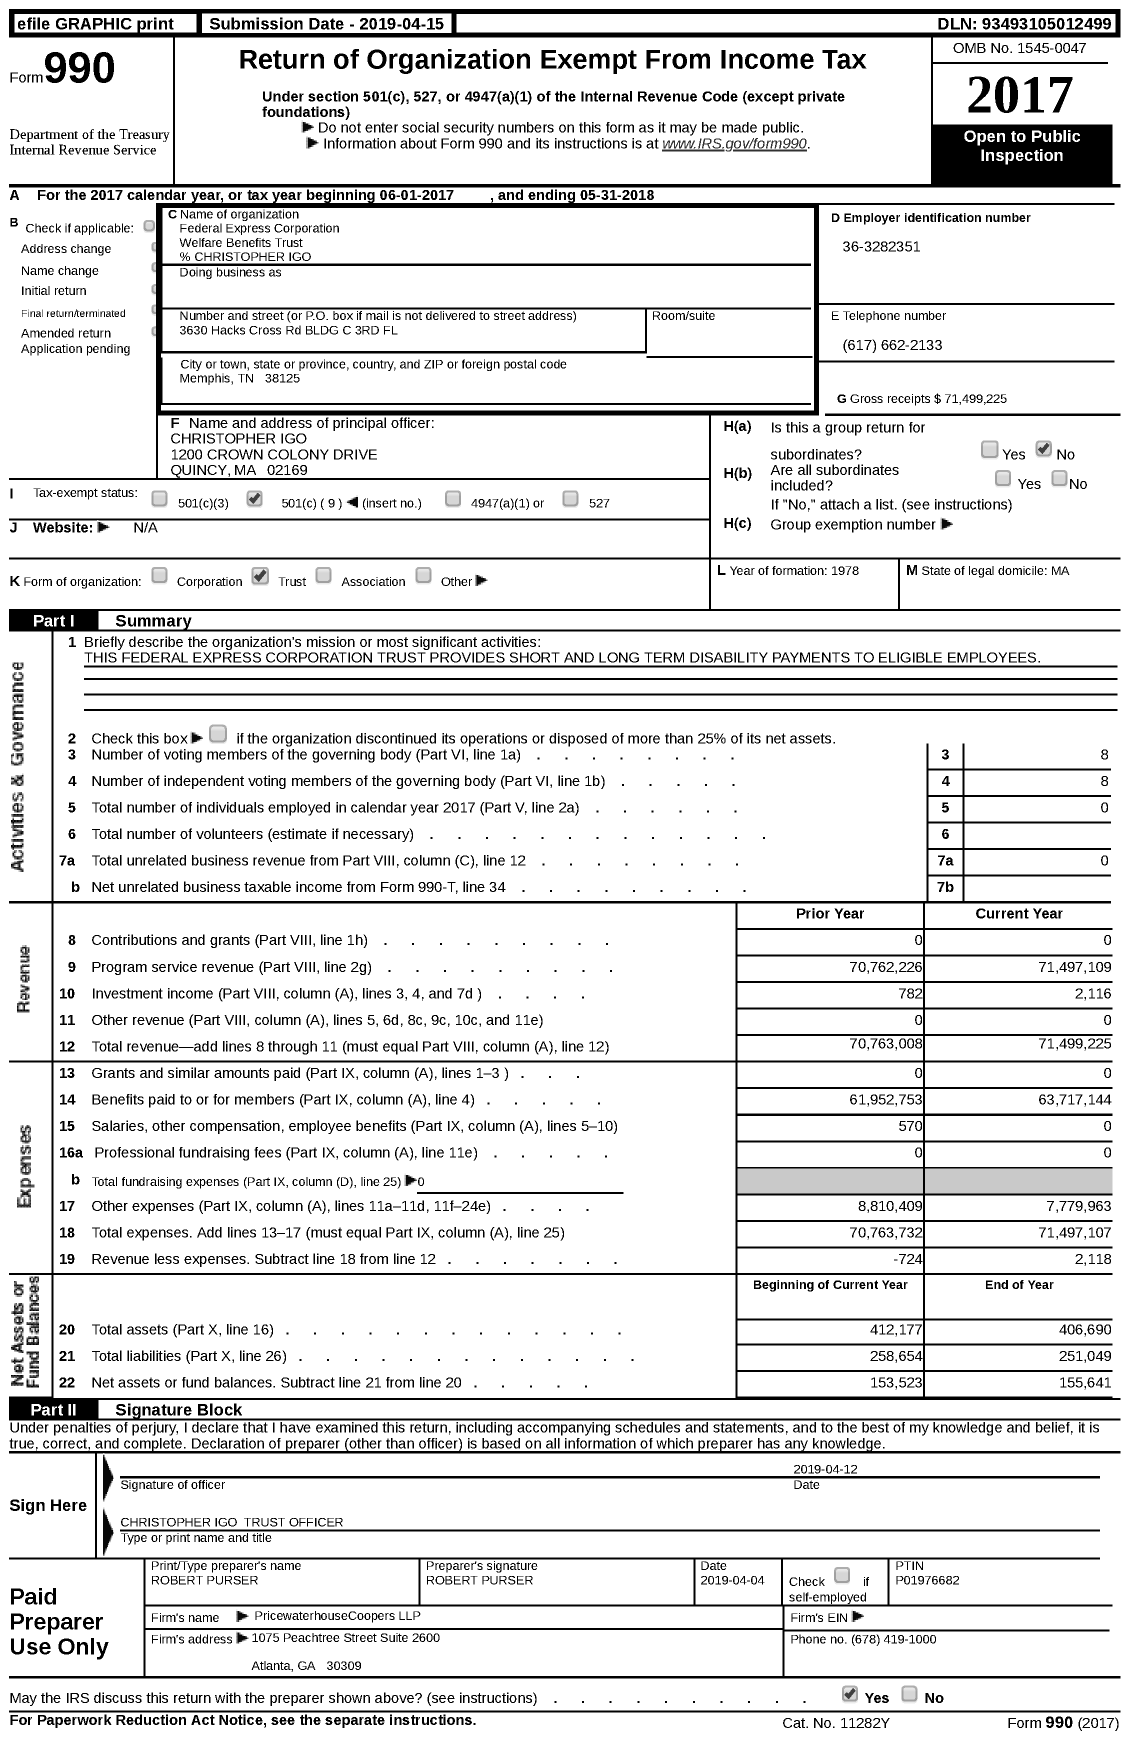 Image of first page of 2017 Form 990 for Federal Express Corporation Welfare Benefits Trust